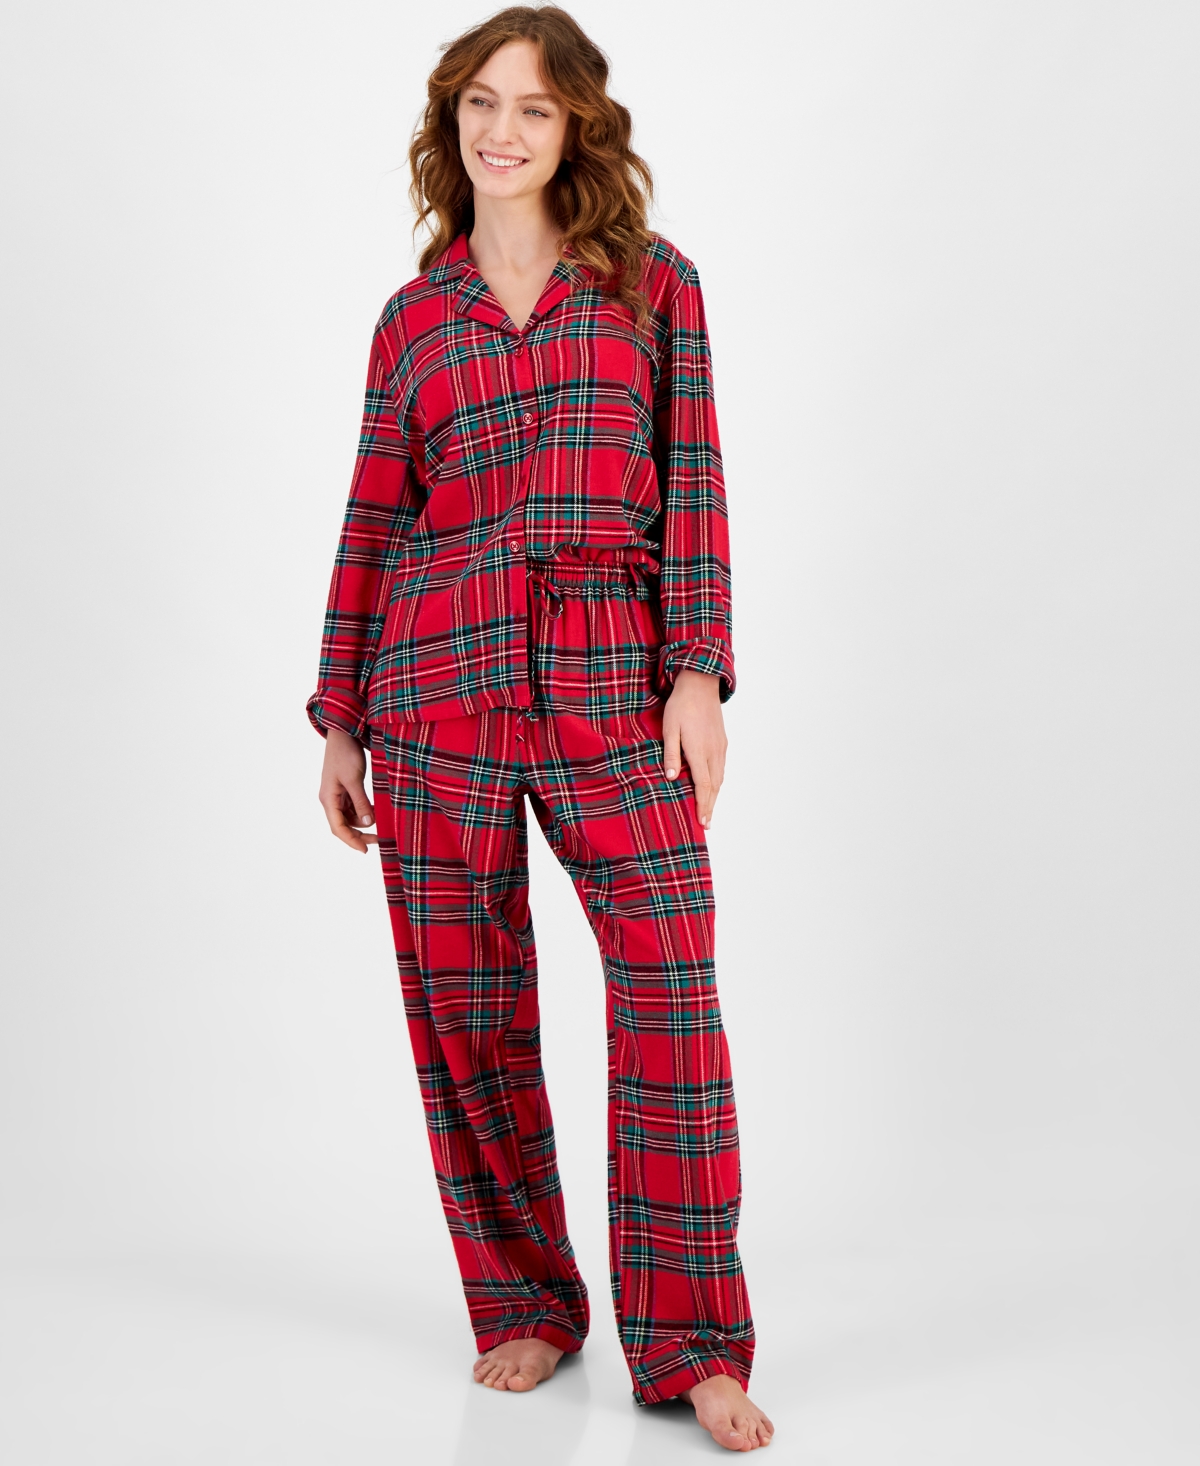 Family Pajamas Matching  Plus Size Brinkley Cotton Plaid Pajamas Set, Created For Macy's In Brinkley Plaid